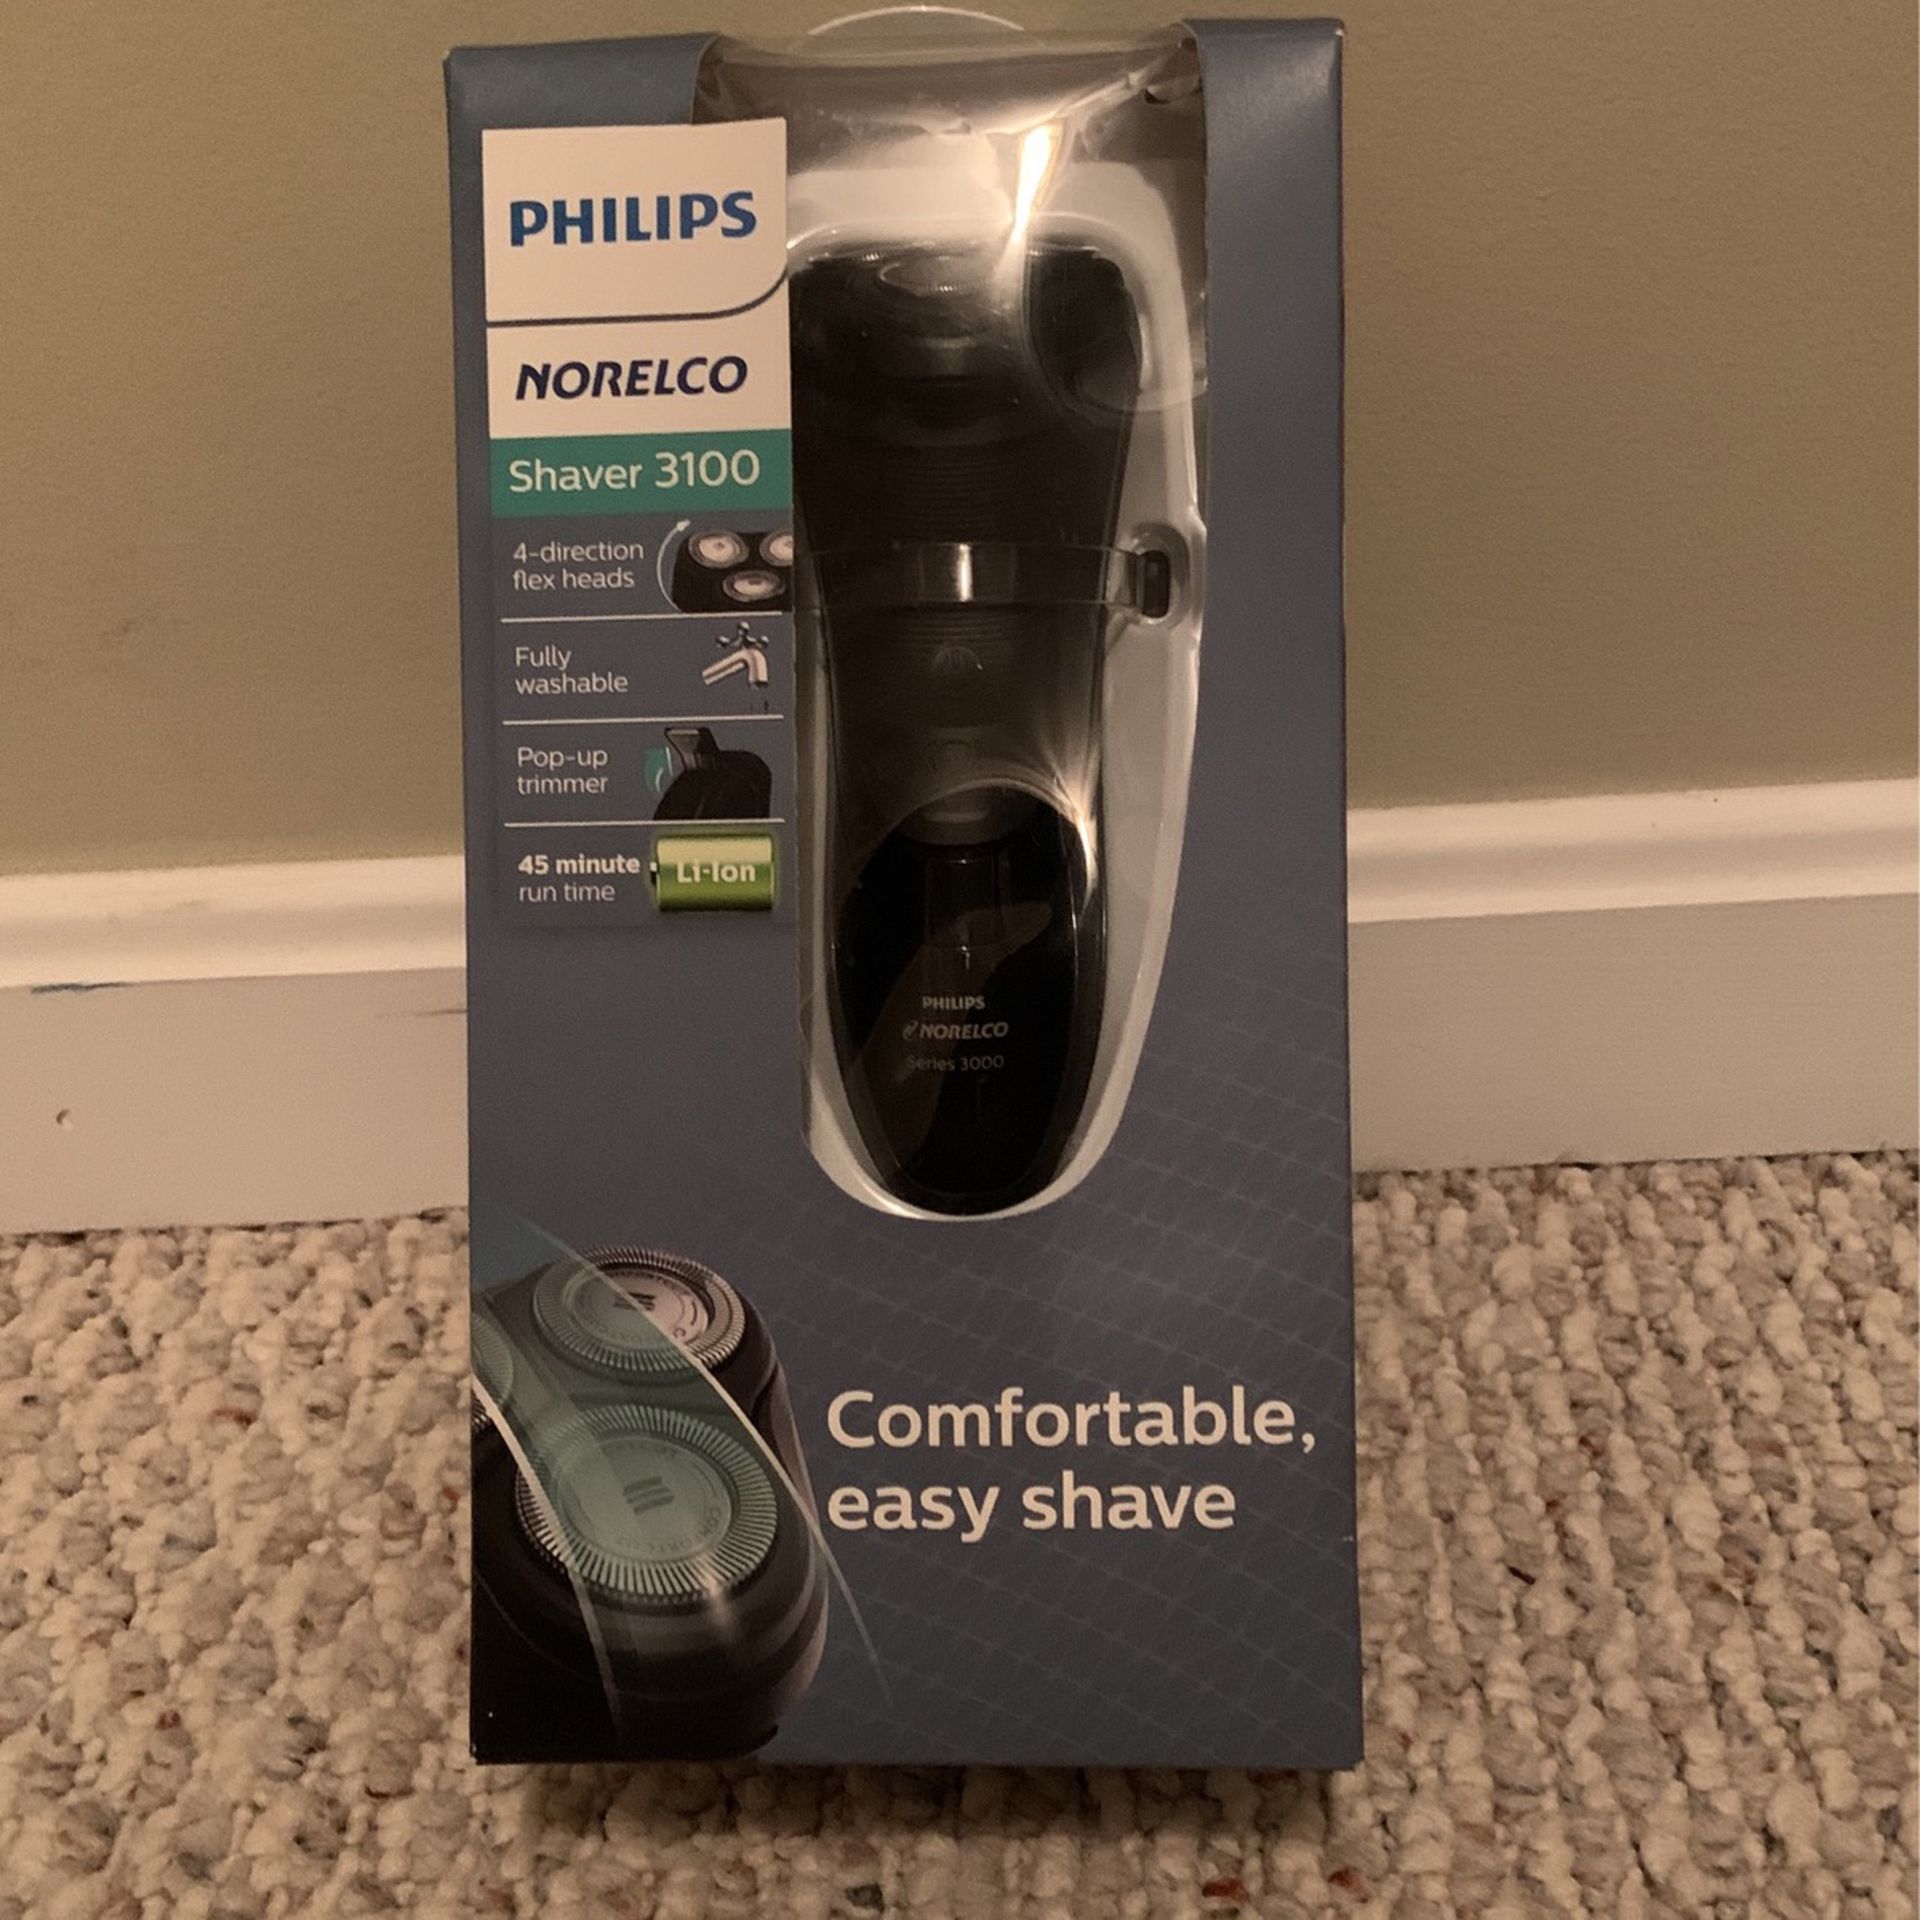 Philips Norelco Shaver 3100 Rechargeable Electric Shaver with Pop-up Trimmer, S3310/81